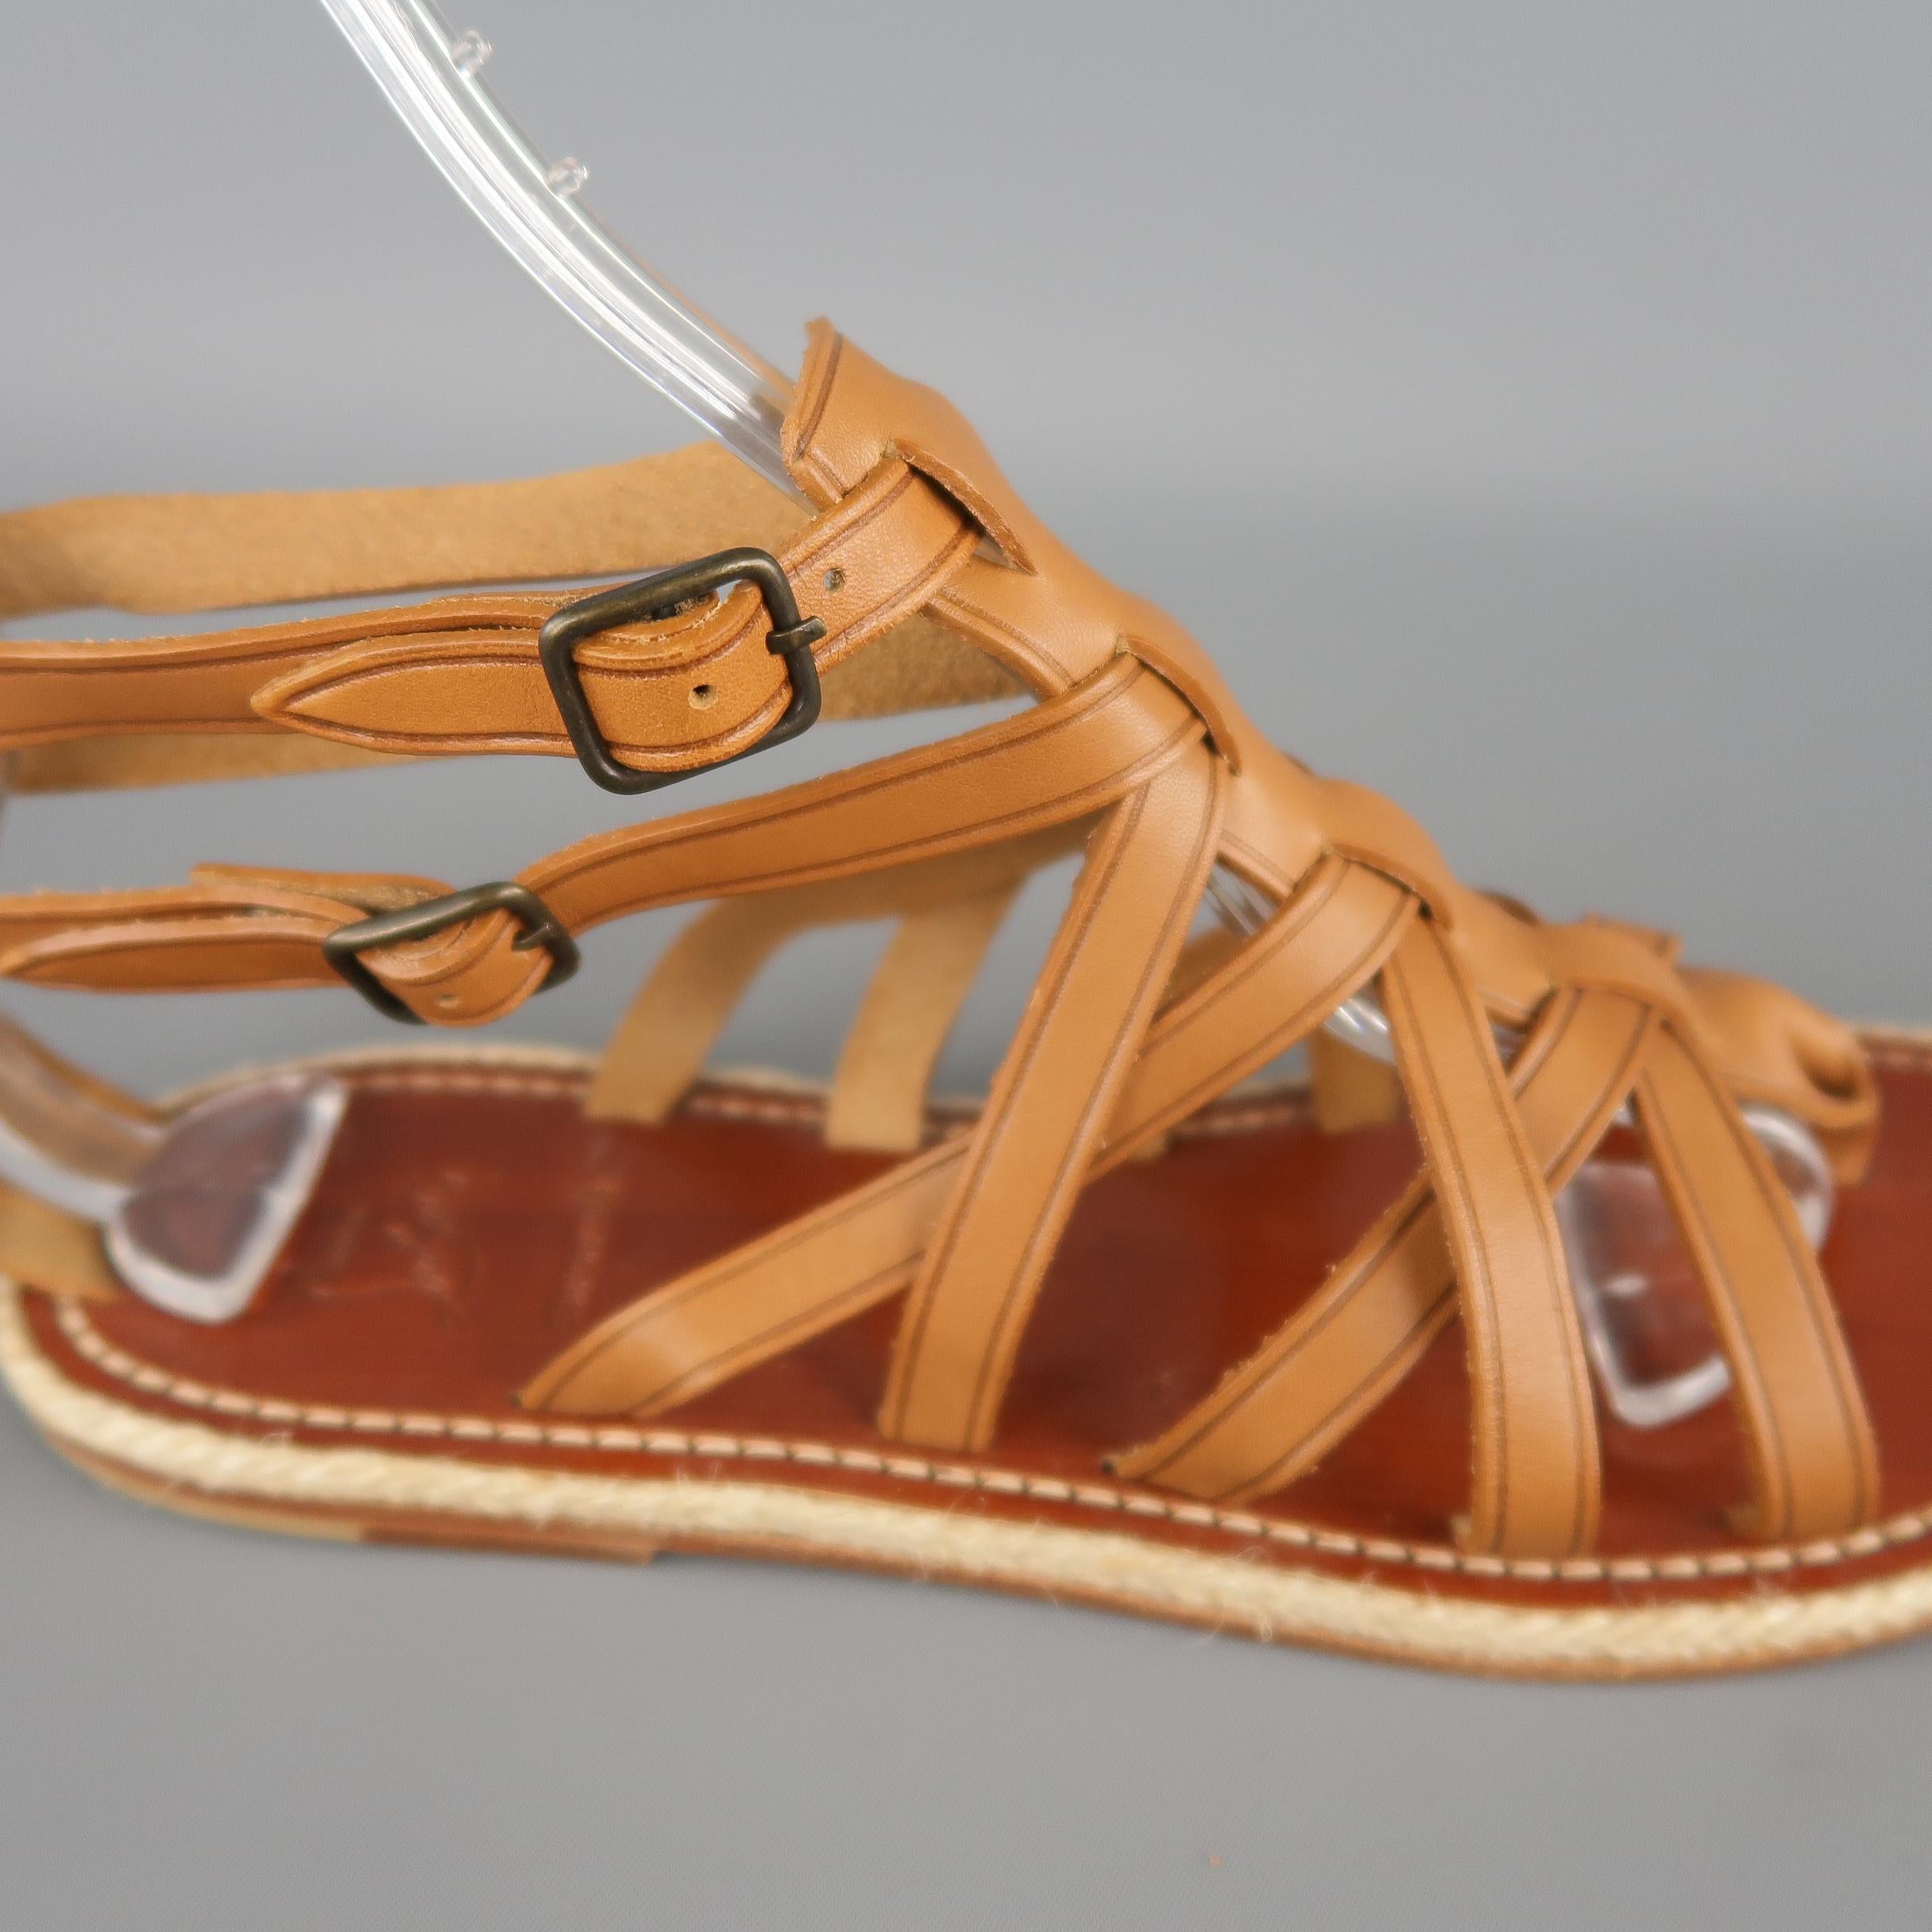 CHRISTIAN LOUBOUTIN gladiator style sandals features tan crossed straps and a braided mid sole. Made in Spain.
 
Excellent Pre-Owned Condition.
Marked: IT 40
 
10.25 x 3.75 in.